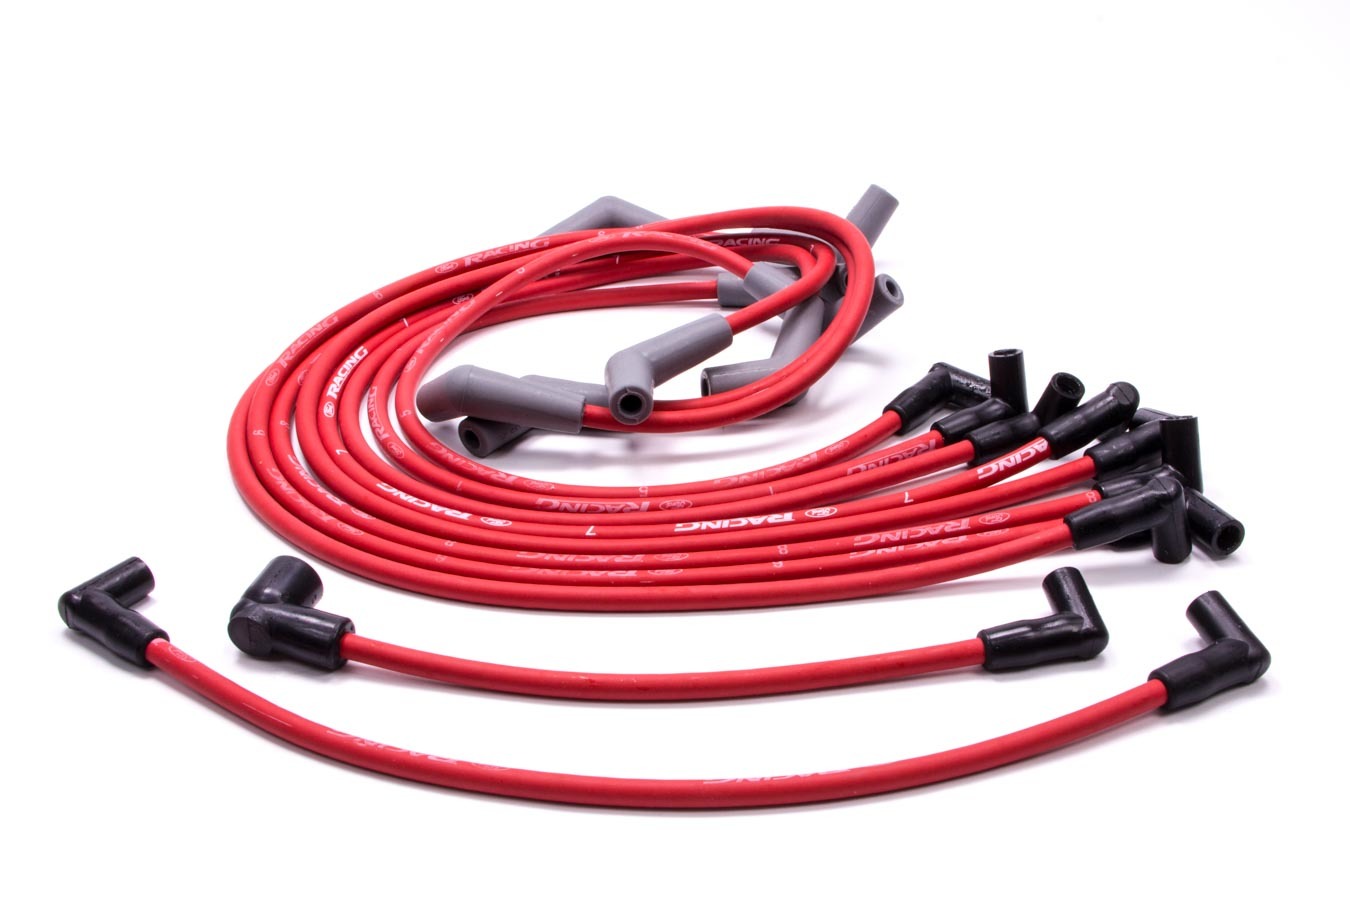 Ford Performance M12259-R460 Spark Plug Wire Set, Ford Racing, Spiral Core, 9 mm, Red, 45 Degree Plug Boots, HEI Style Terminal, Big Block Ford, Kit